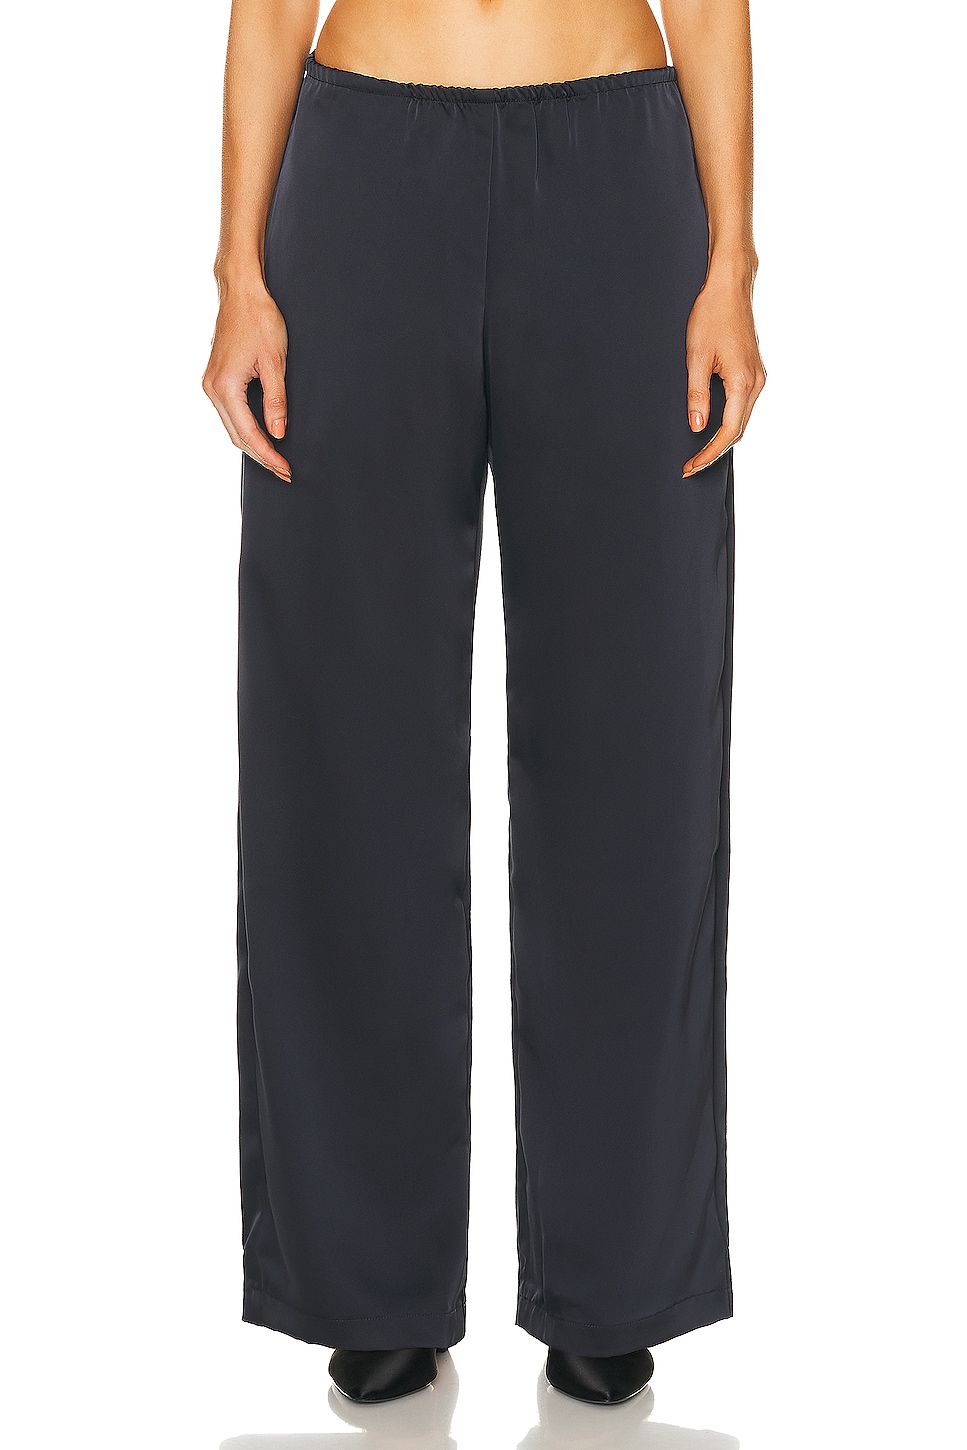 Image 1 of LESET Barb Pocket Pant in Midnight